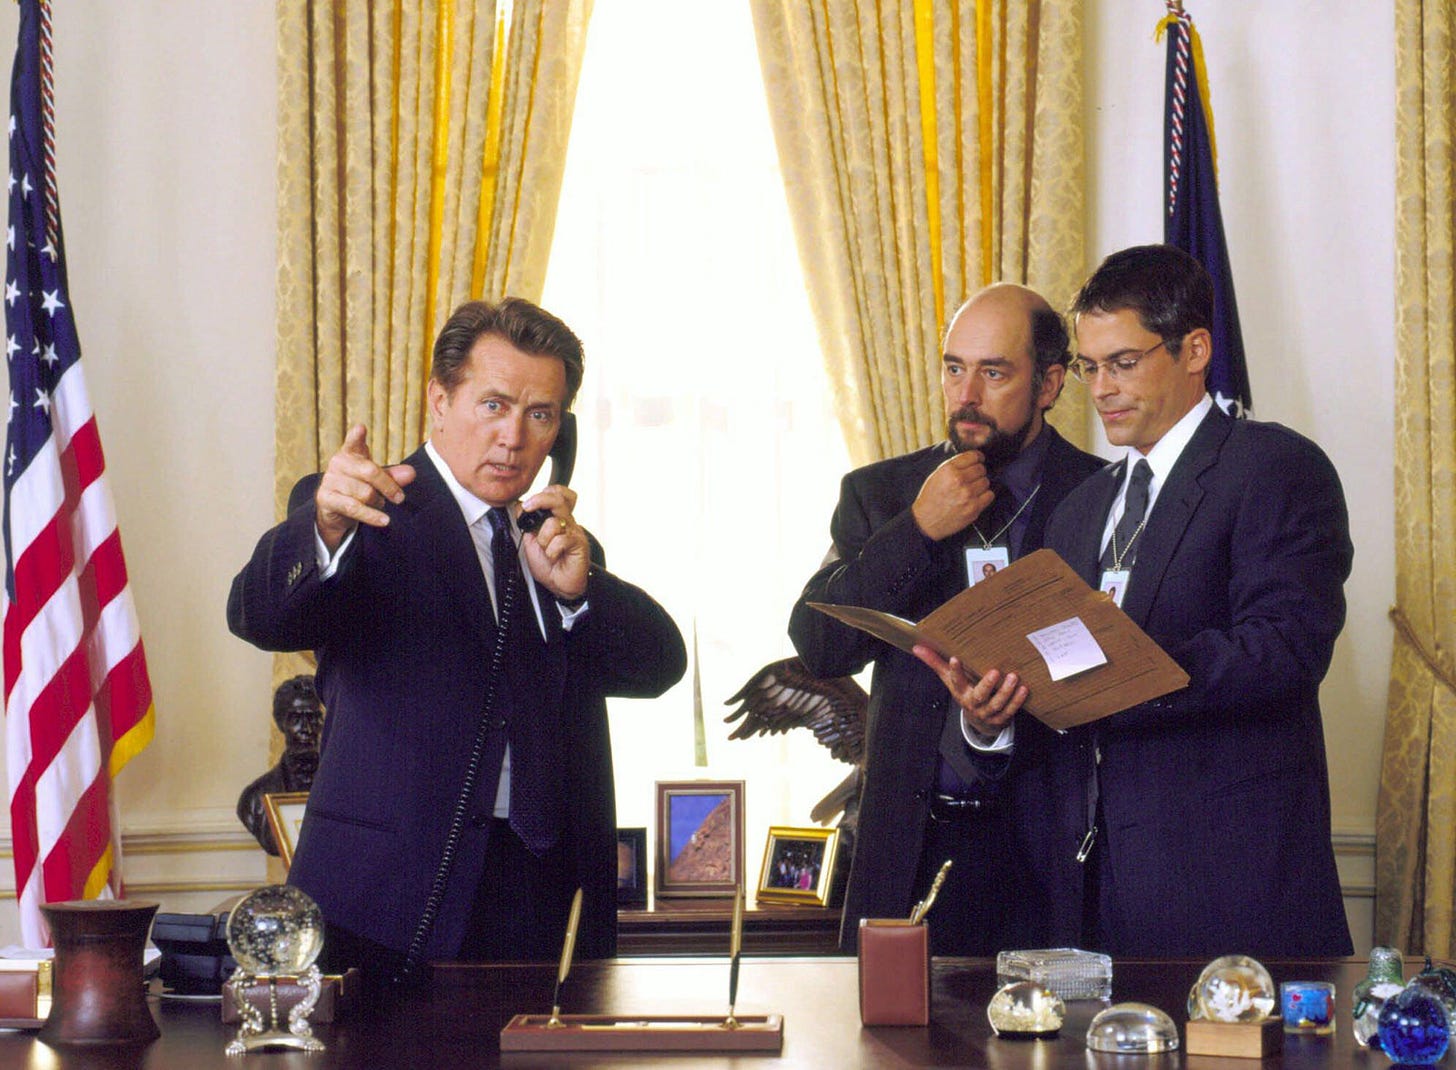 The West Wing | Background & Synopsis | Britannica